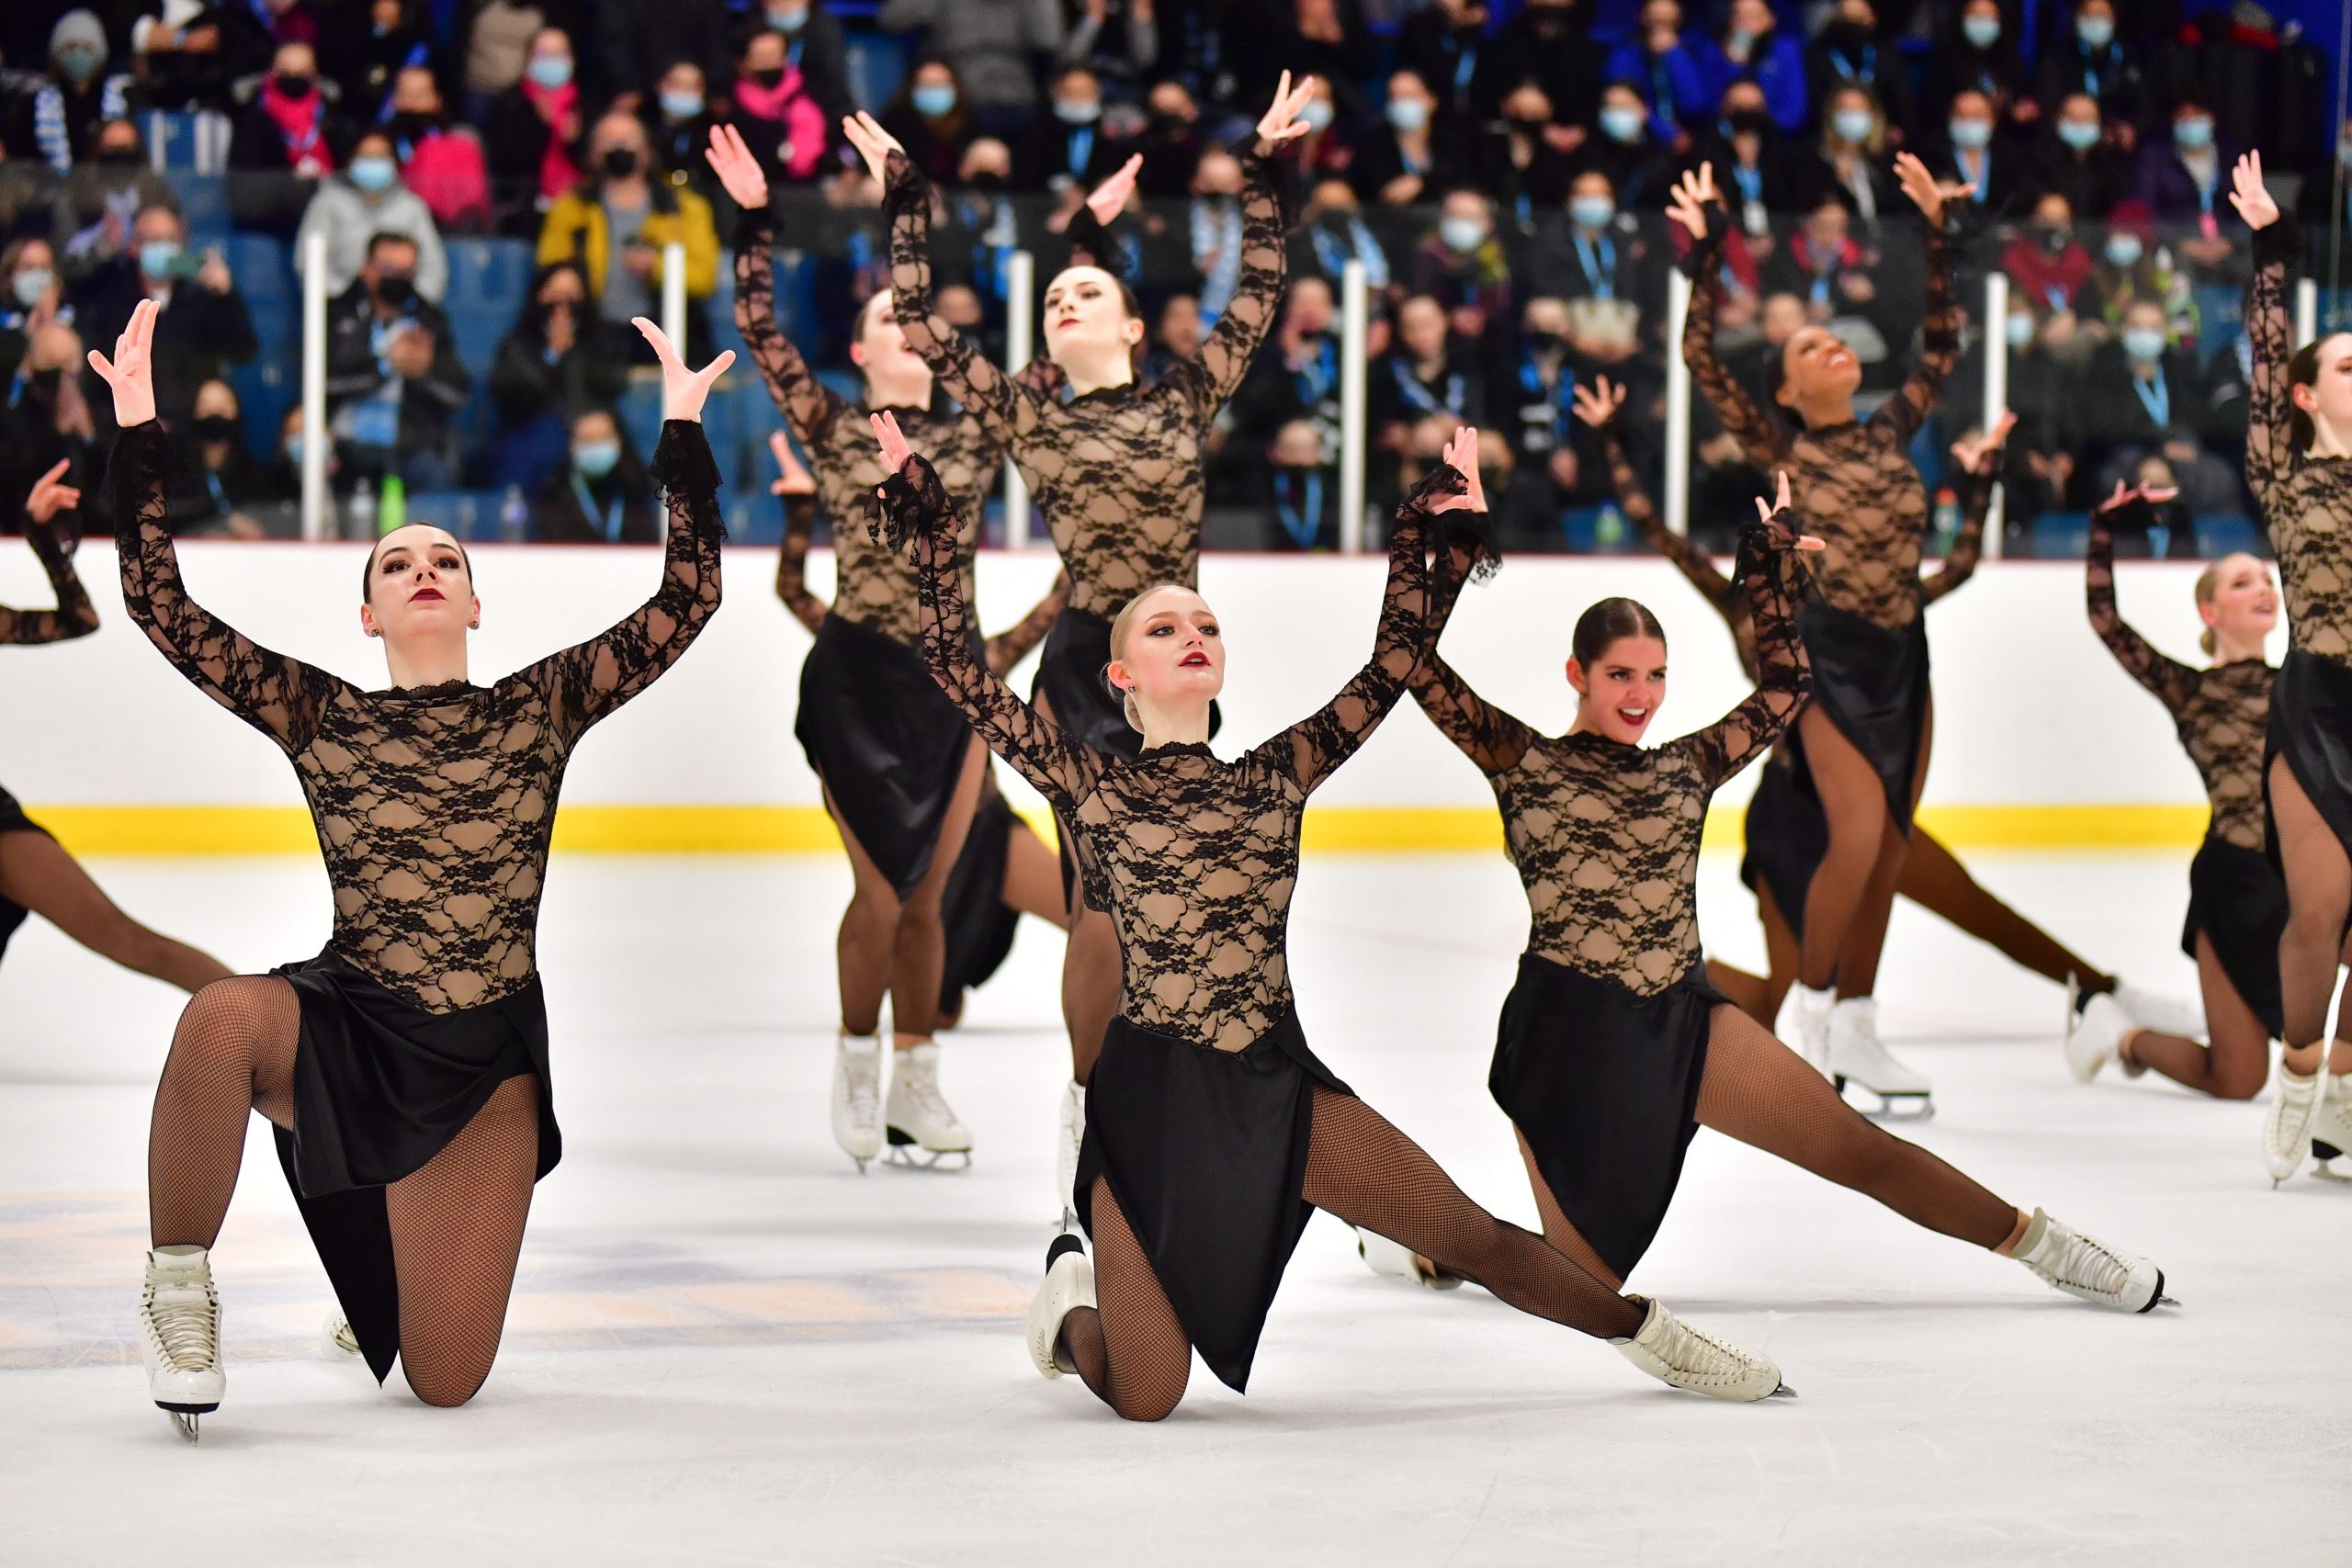 Synchronized skating not considered 'elite,' club forced to cancel